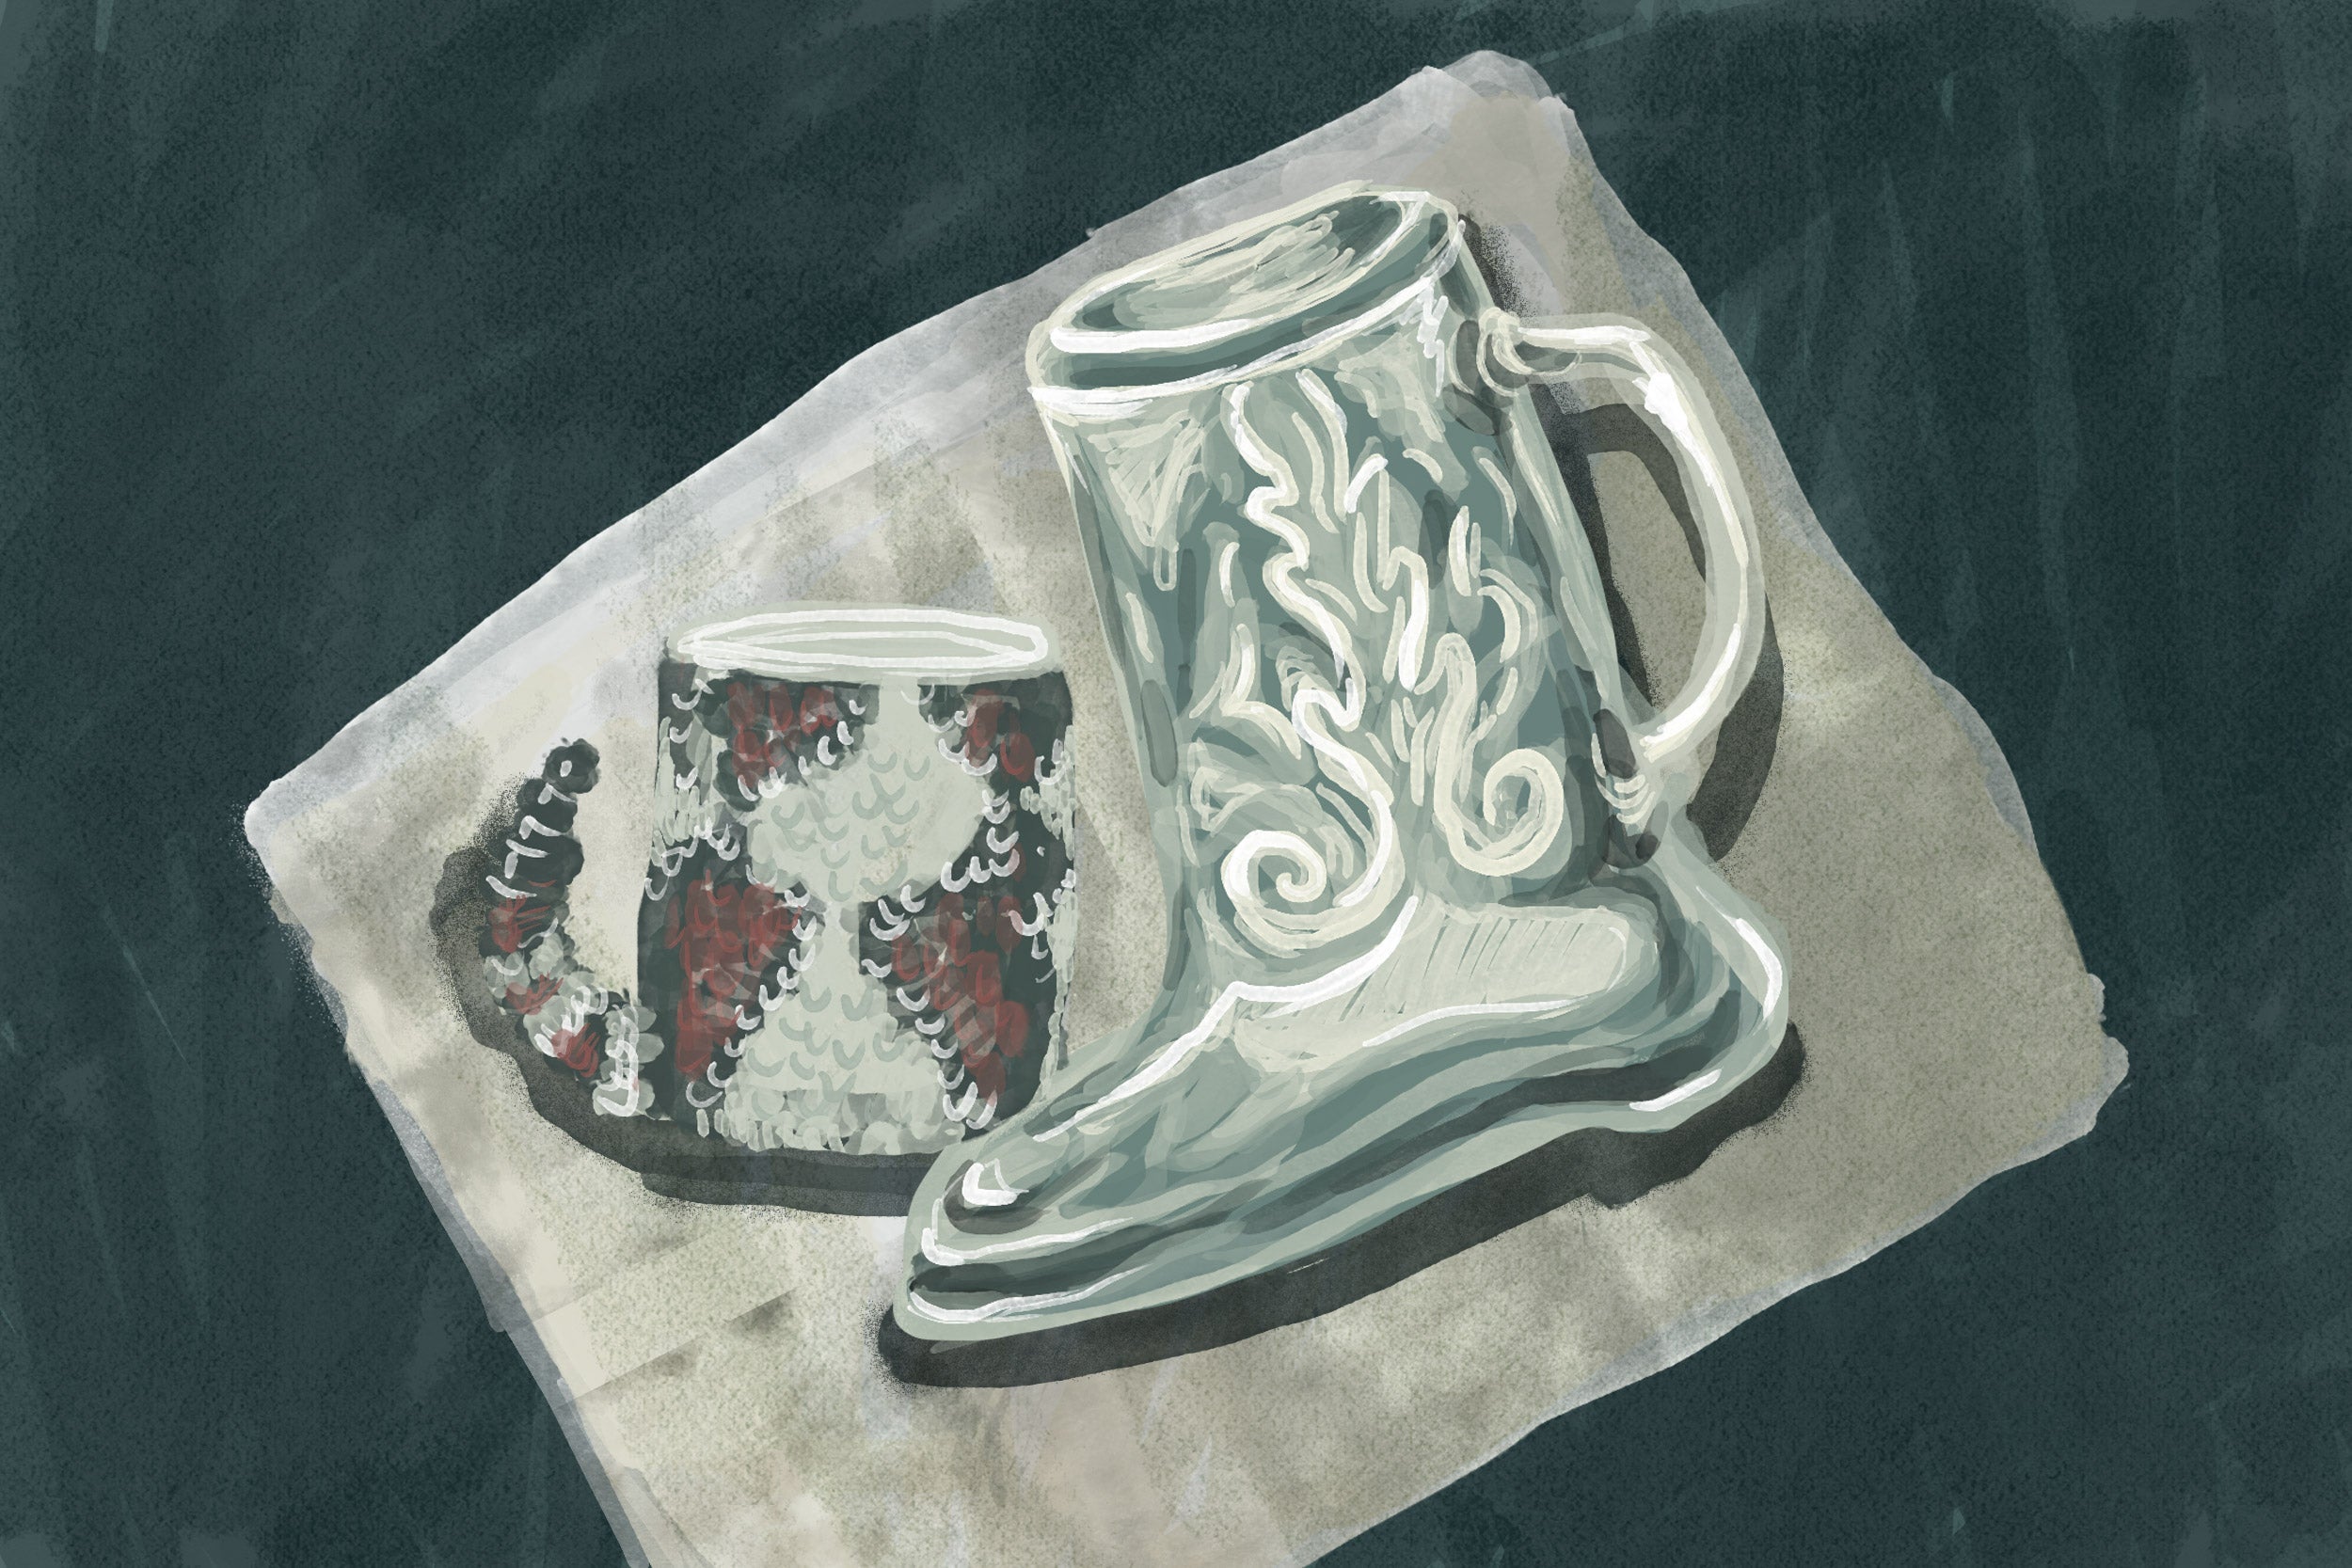 A drawing of a boot-shaped mug with a separate mug can be seen on a napkin.